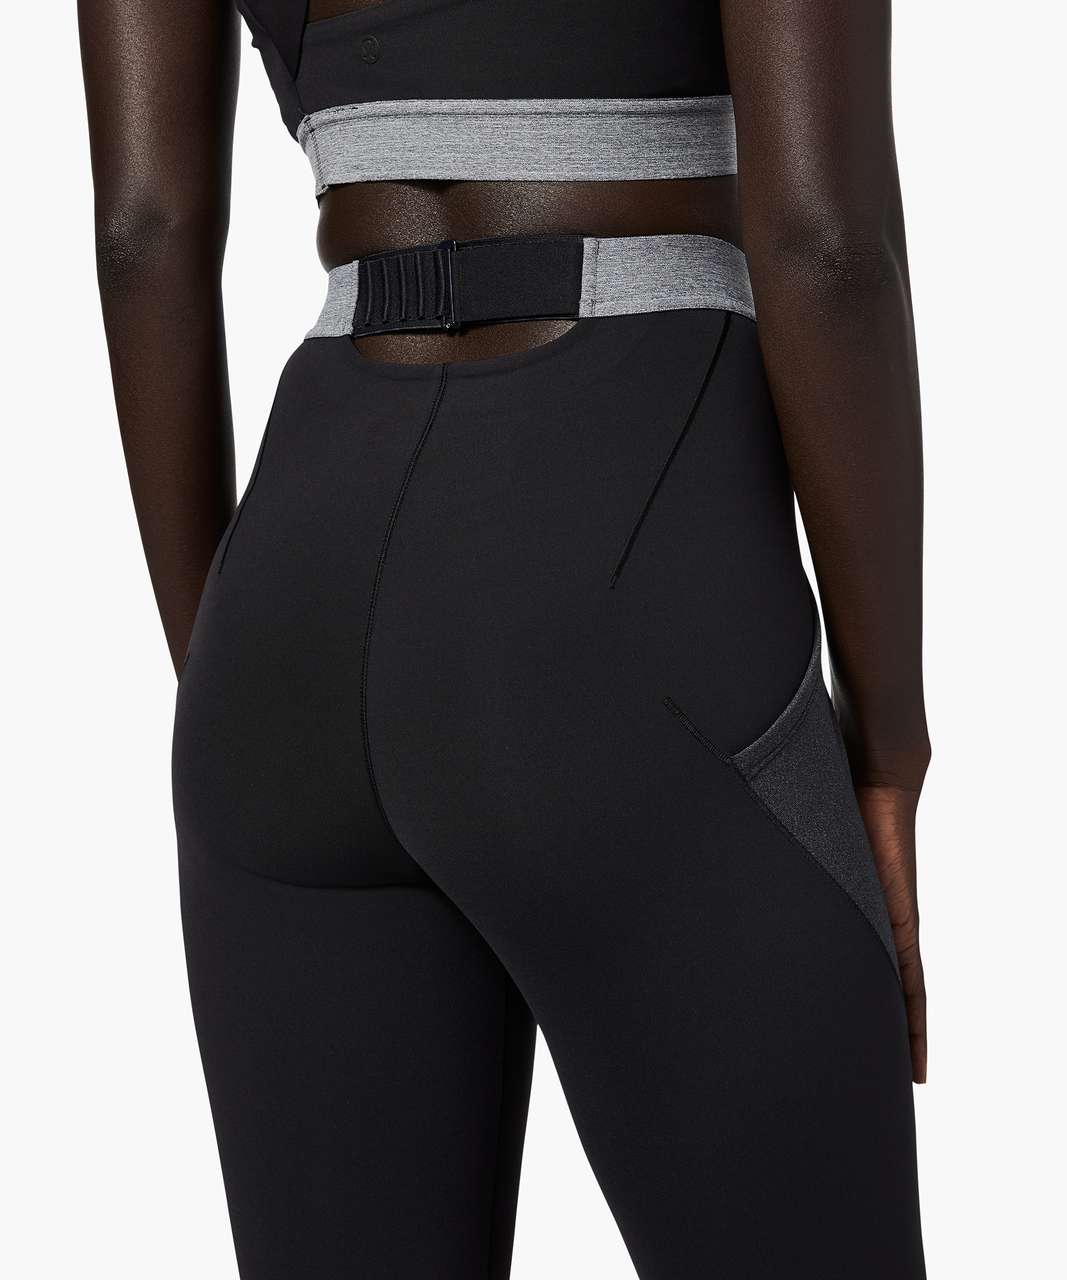 When Does Lululemon Release New Colors